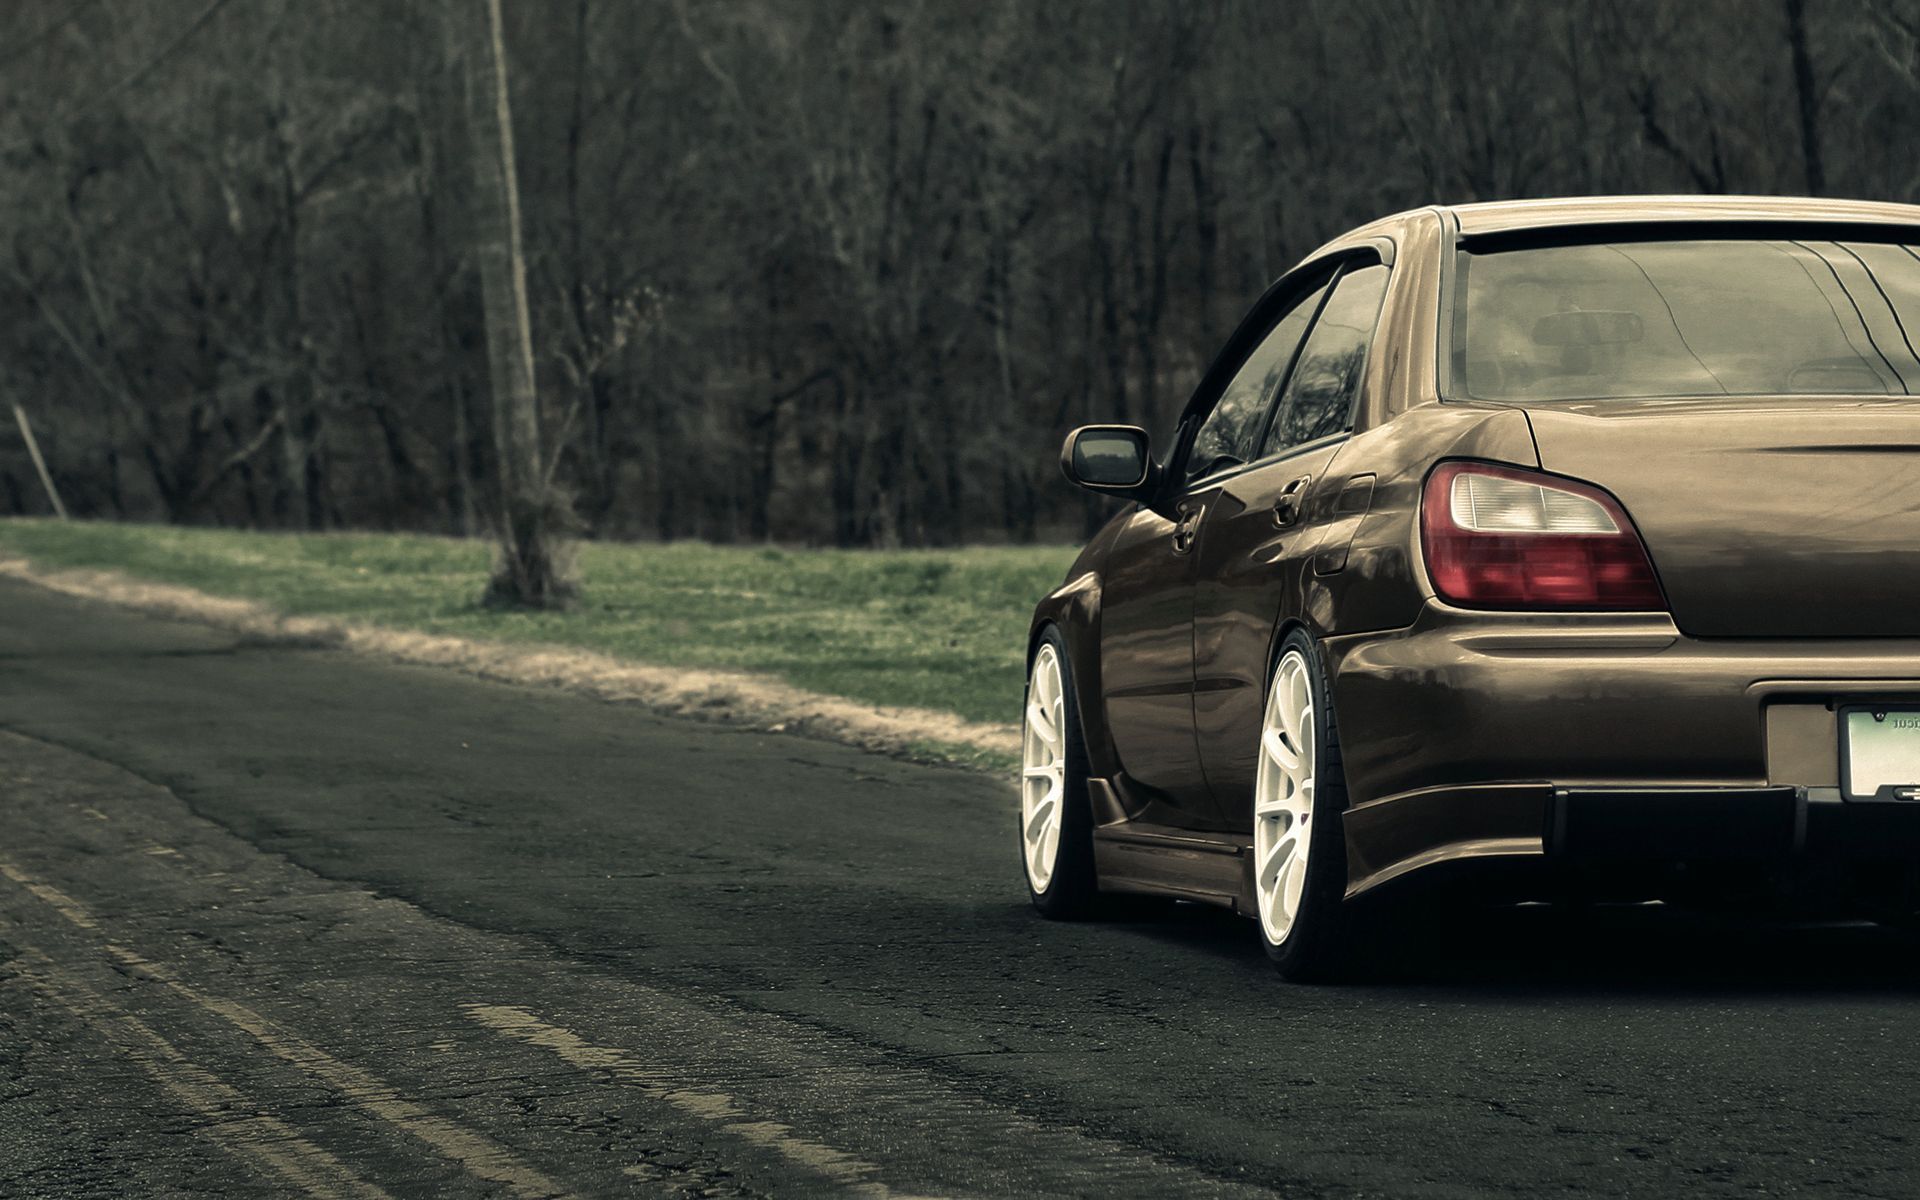 Subaru Impreza WRX wallpapers and images - wallpapers, pictures ...